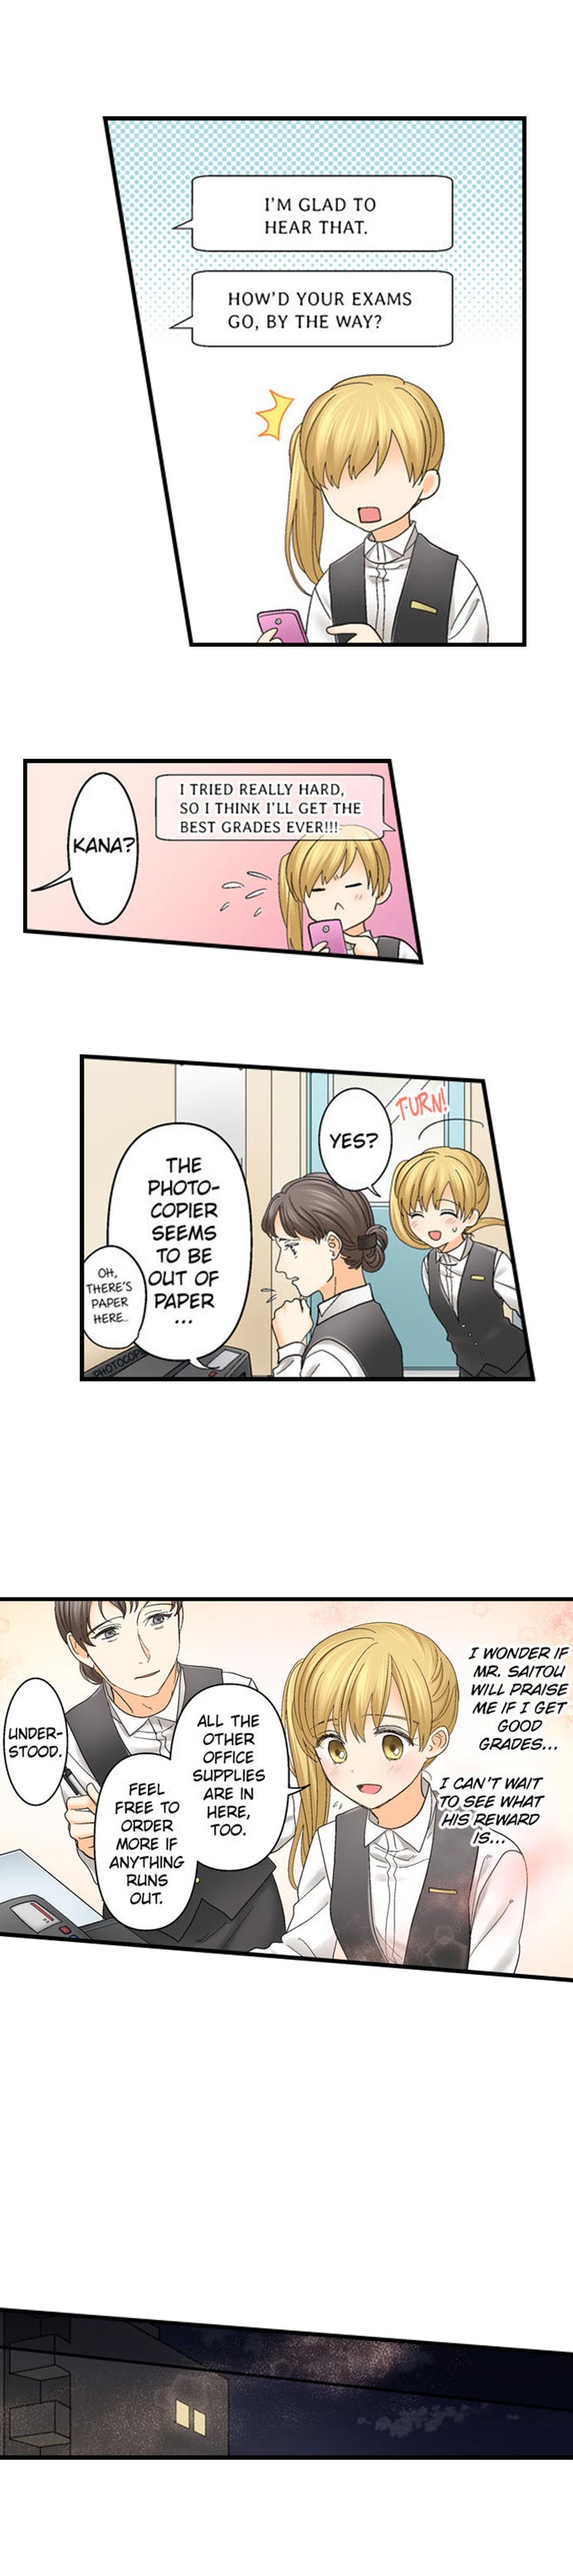 Running a Love Hotel with My Math Teacher - Chapter 92 Page 8